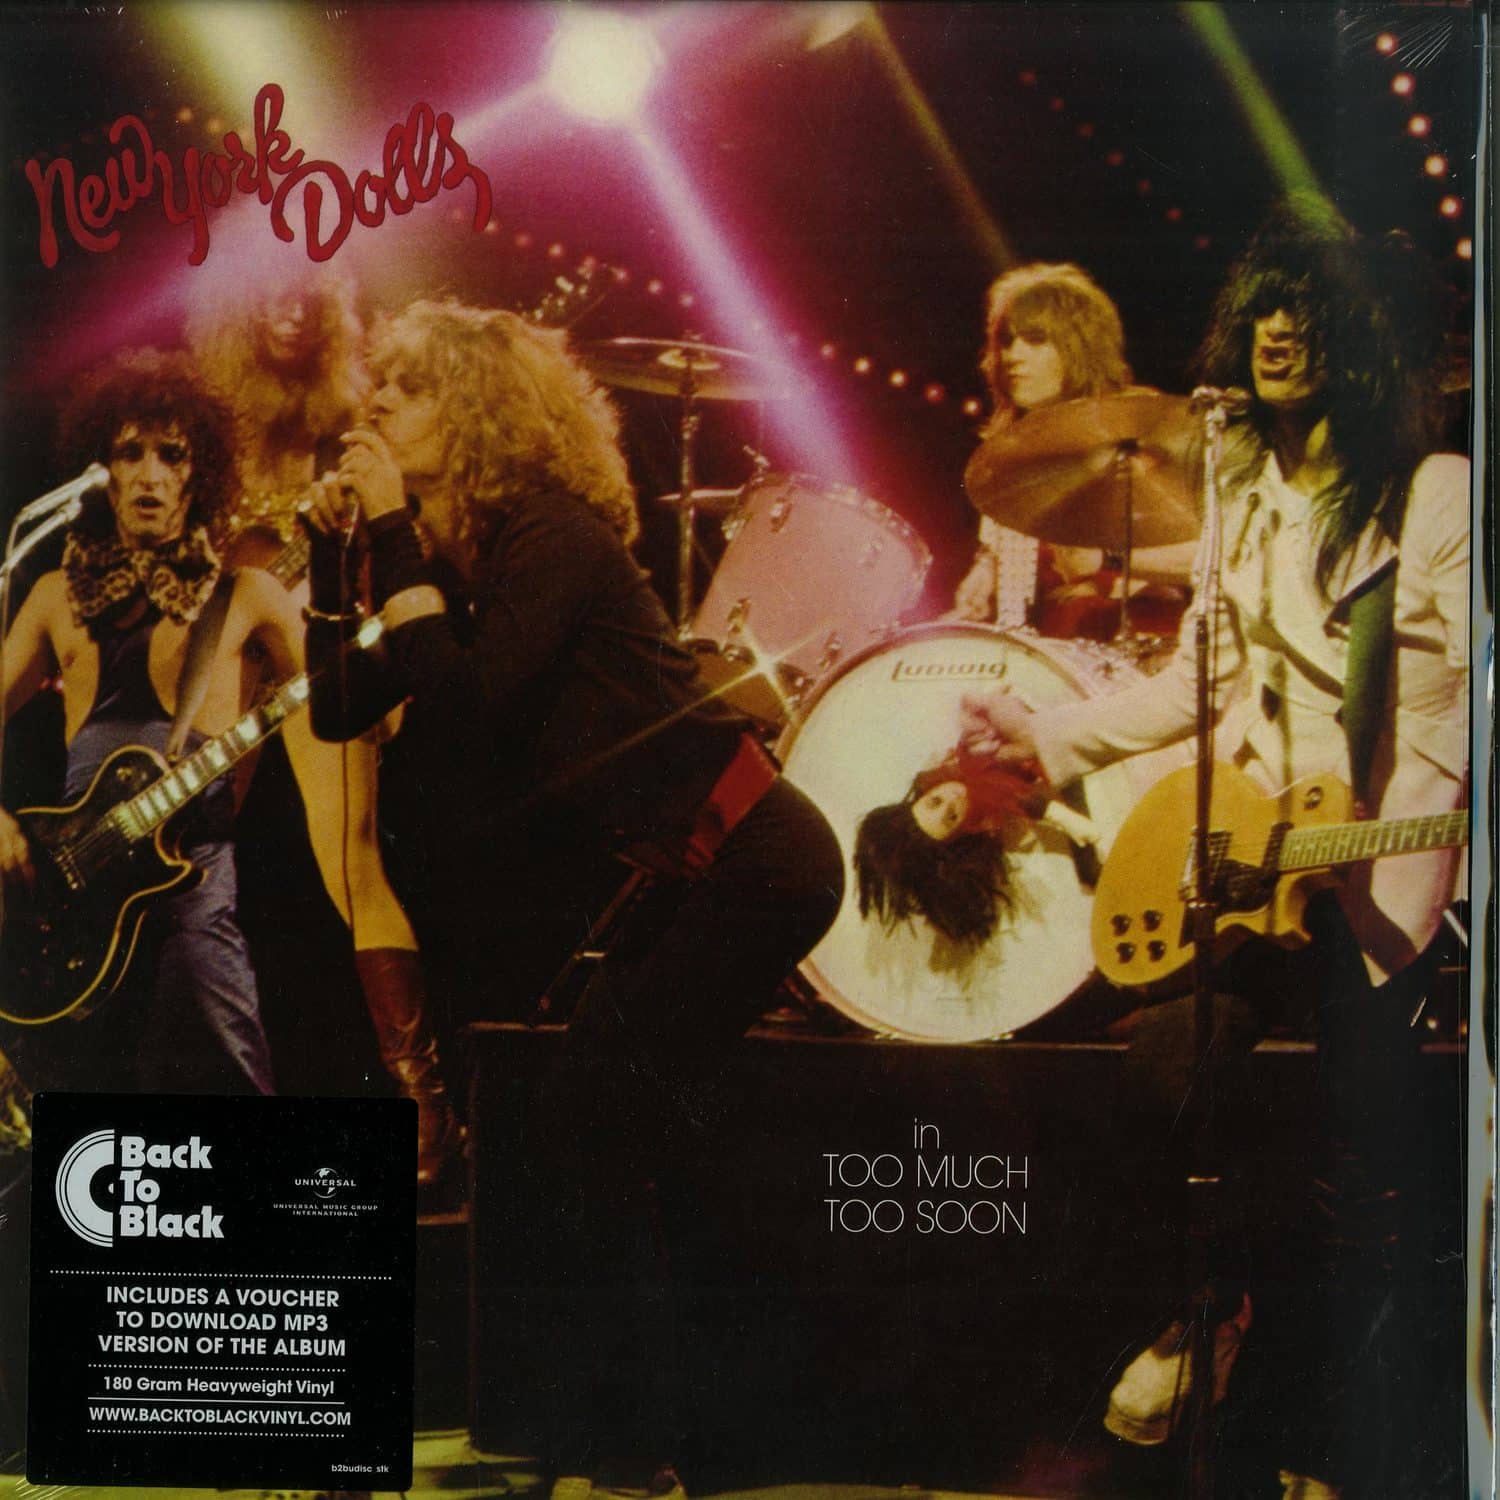 New York Dolls - TOO MUCH TOO SOON 